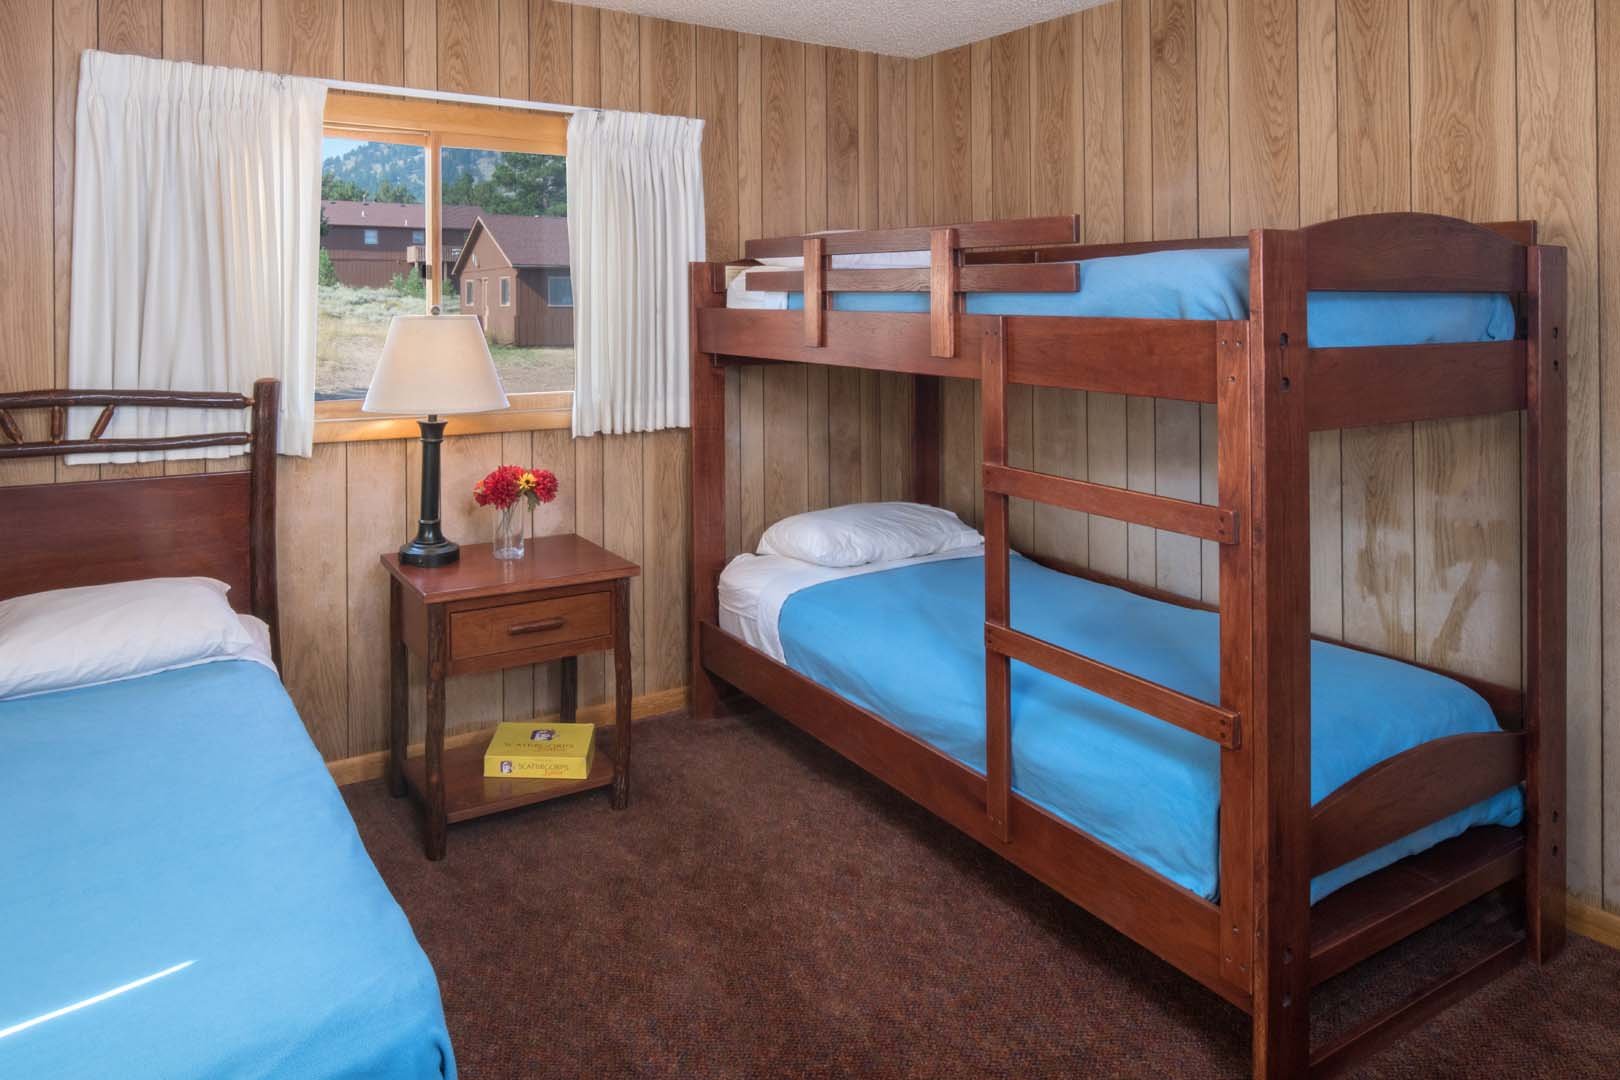 Bunk beds and single bed in Cabin